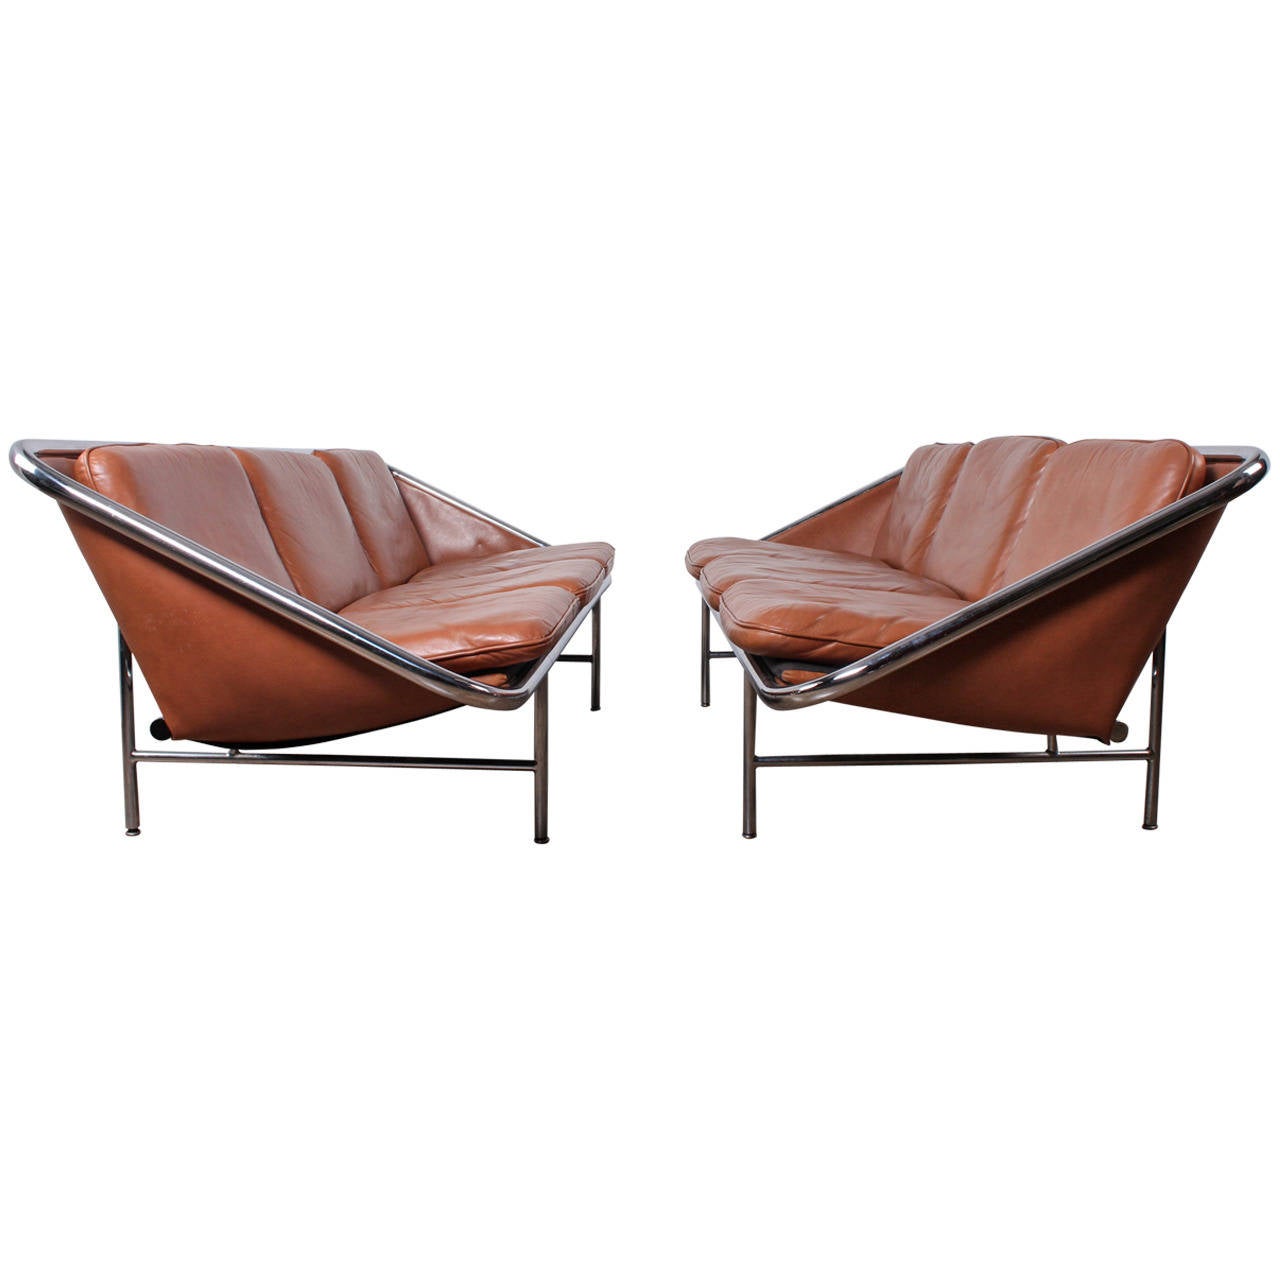 George Nelson pair of sling sofas, 1960s